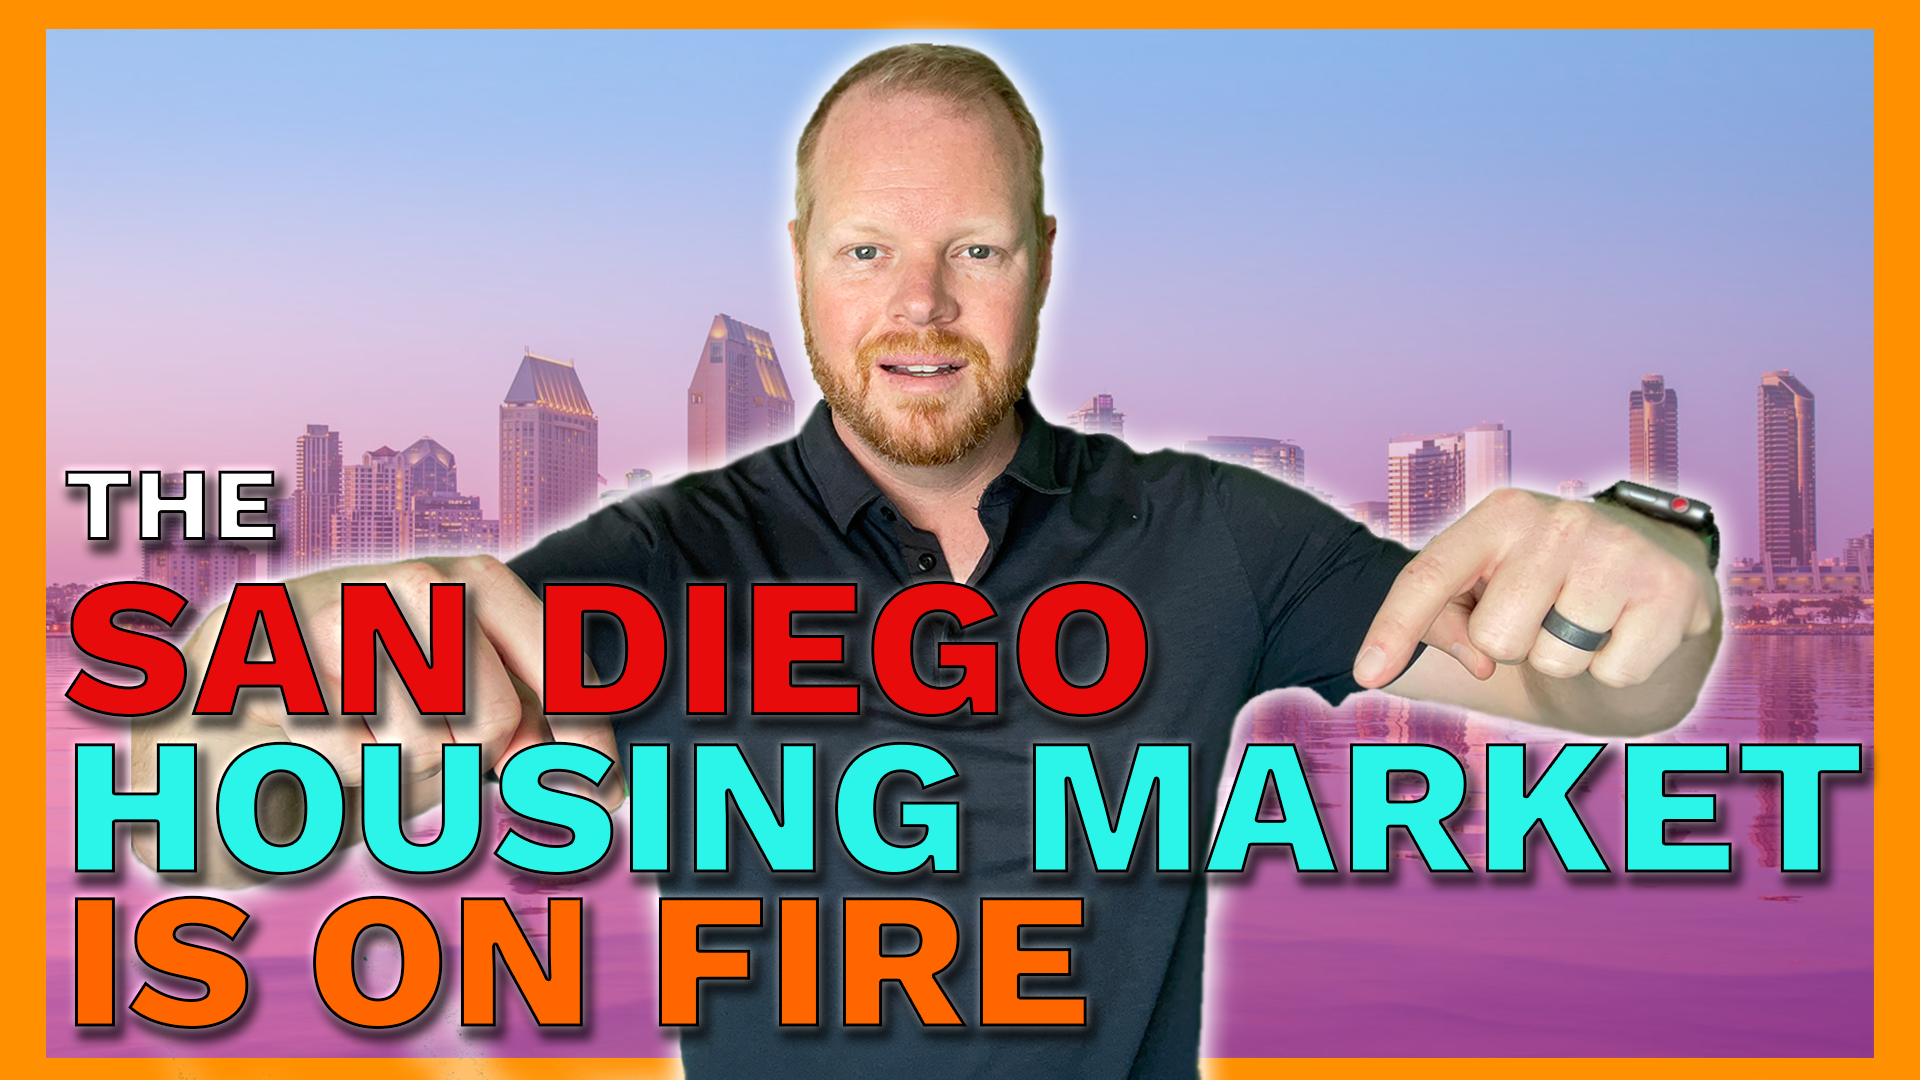 What’s Going on in the San Diego Housing Market?